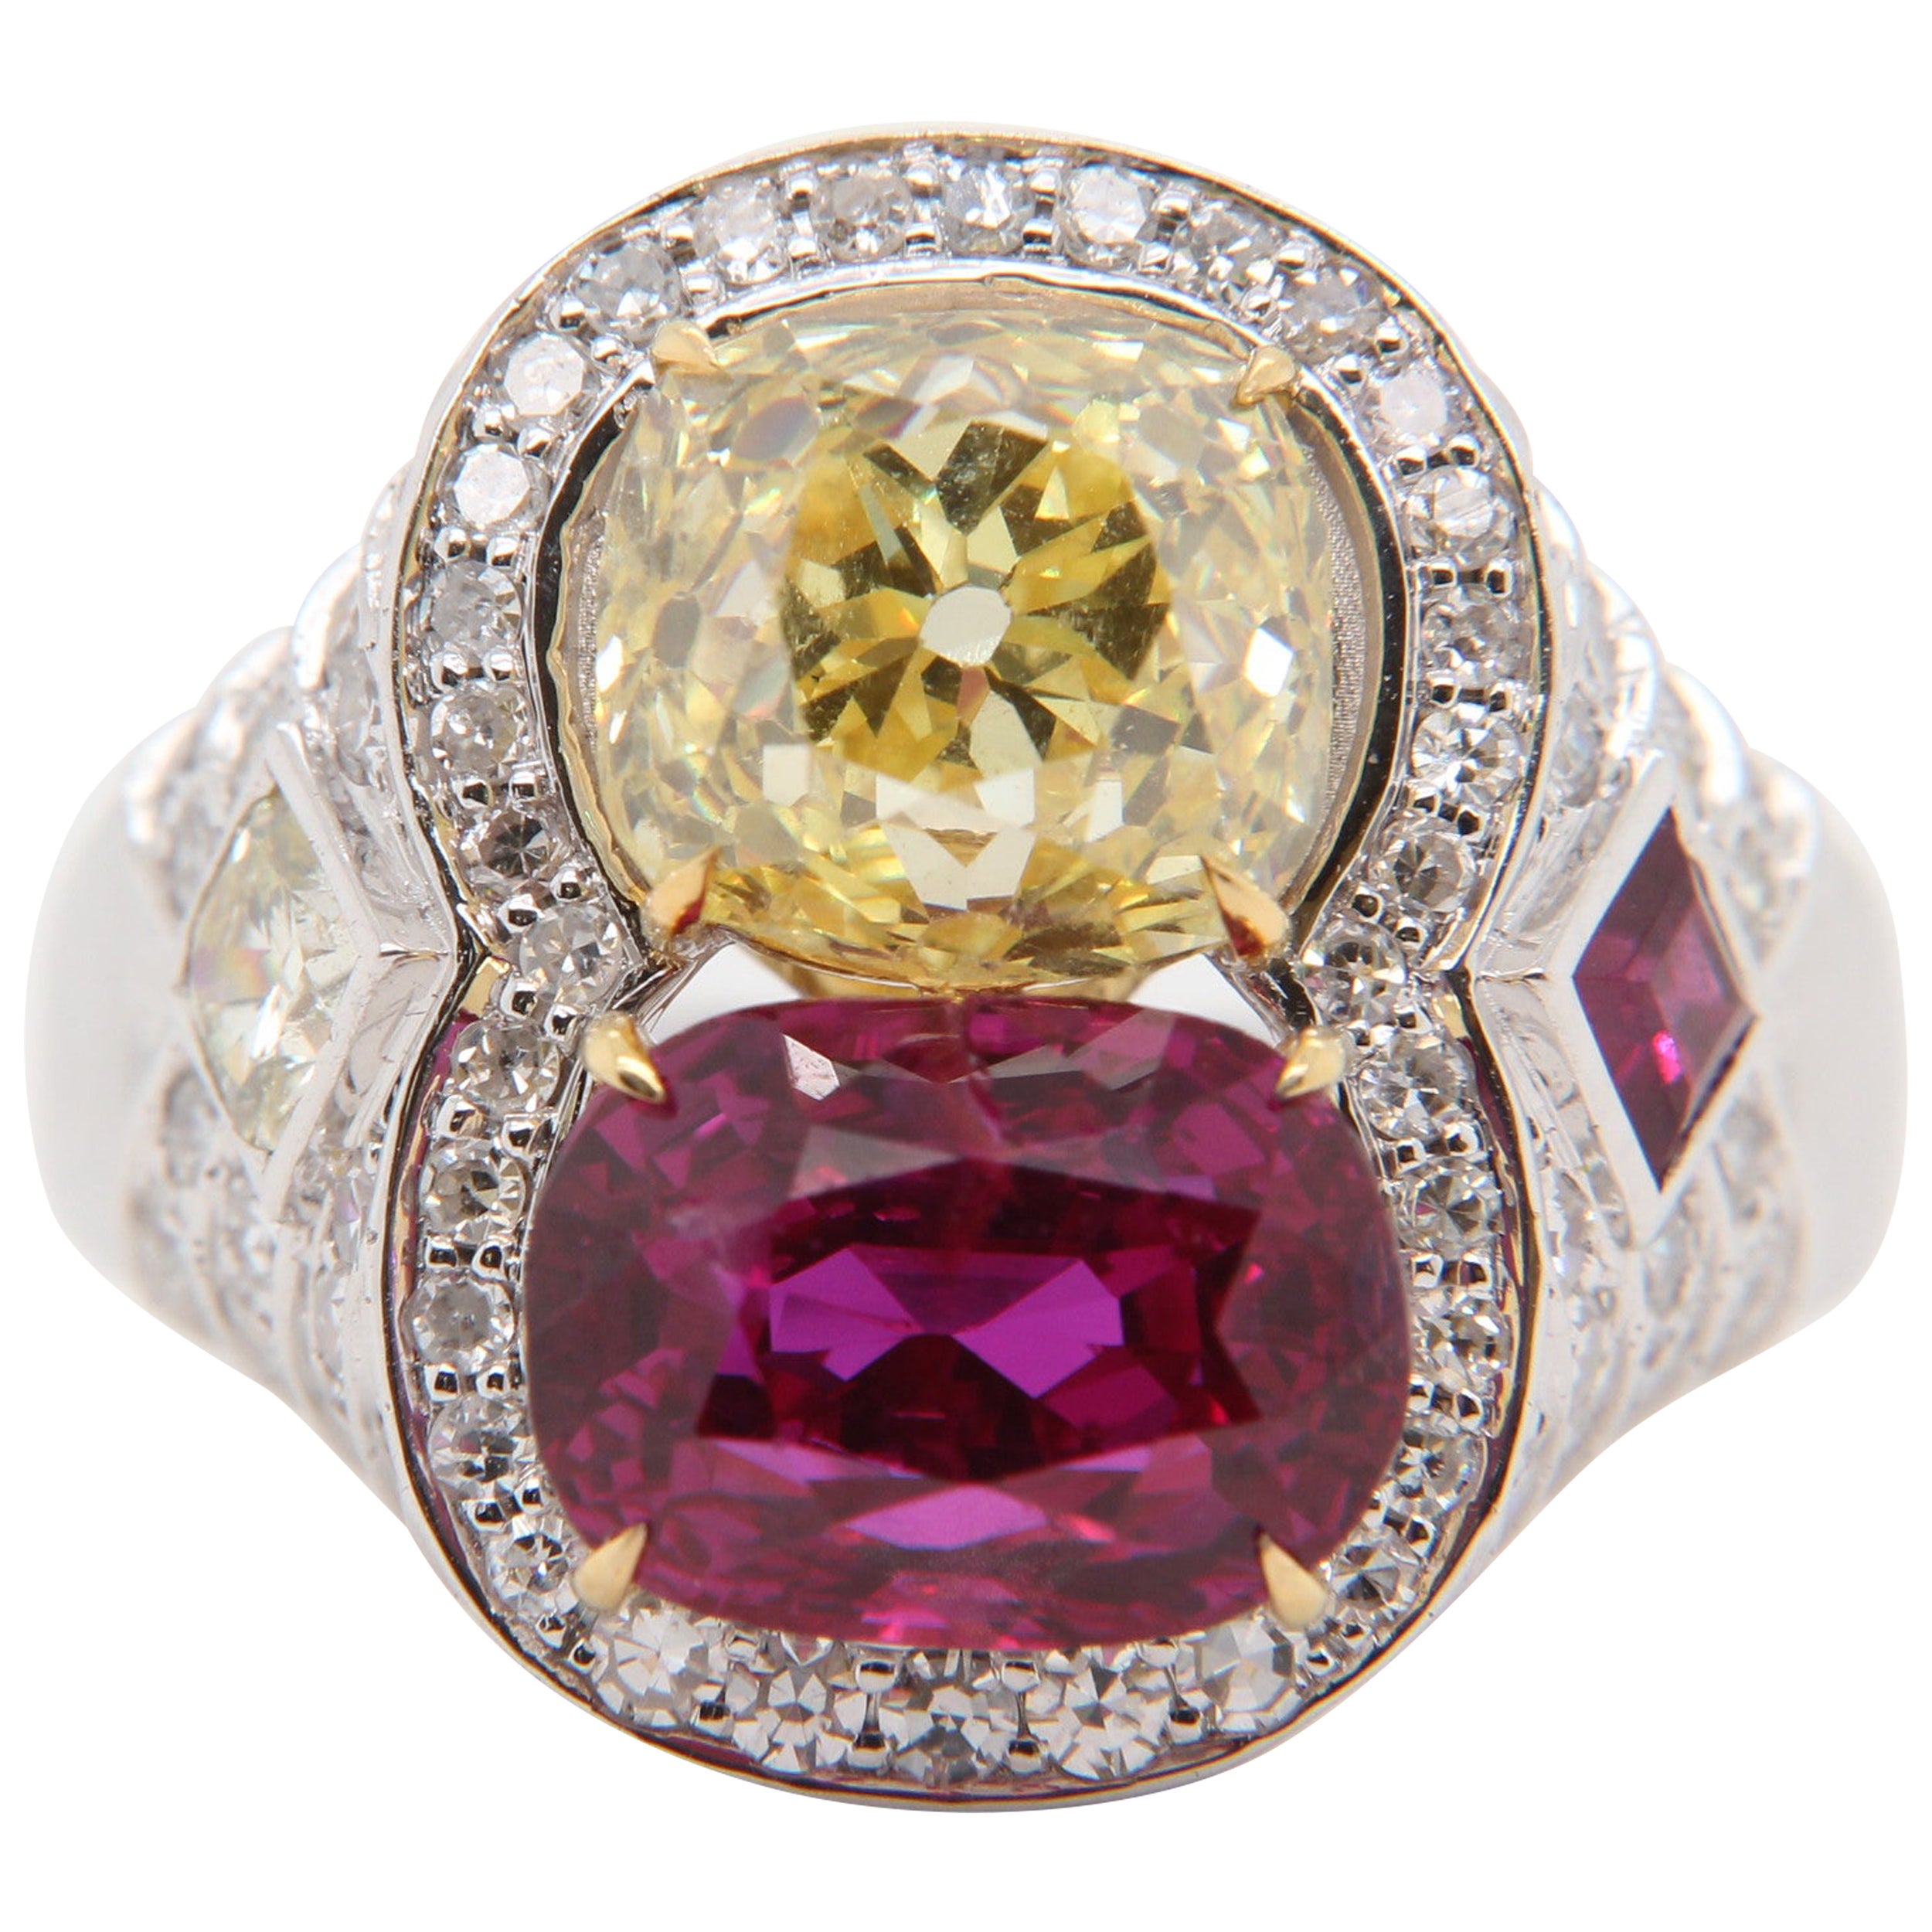 GIA Certified 3.09 'Fancy Intense Yellow' and GRS 'Red' Ruby in 18K Gold Ring For Sale